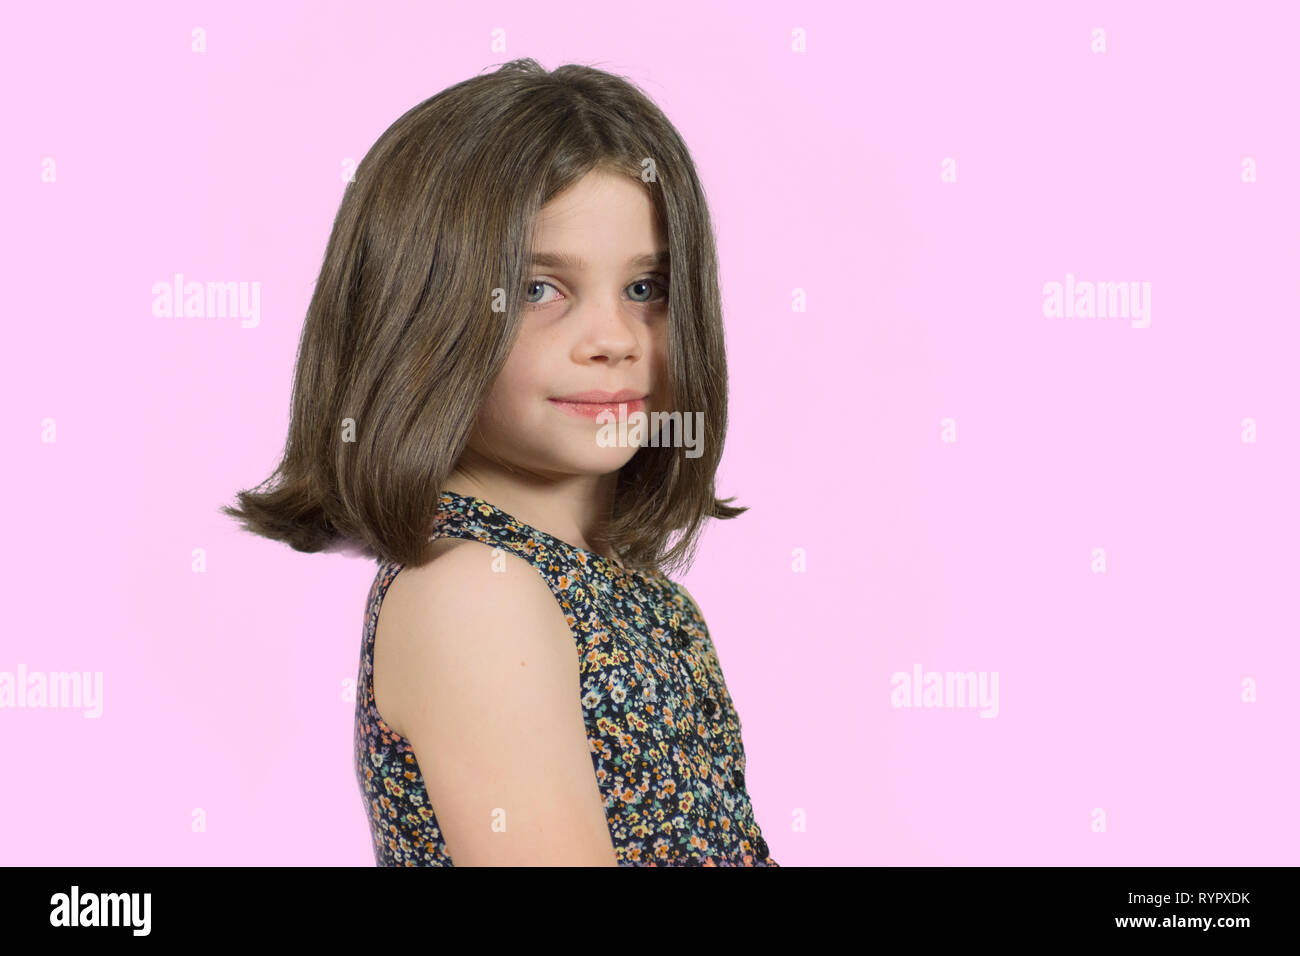 Confident Little Girl With Short Hair With Pink Background Stock